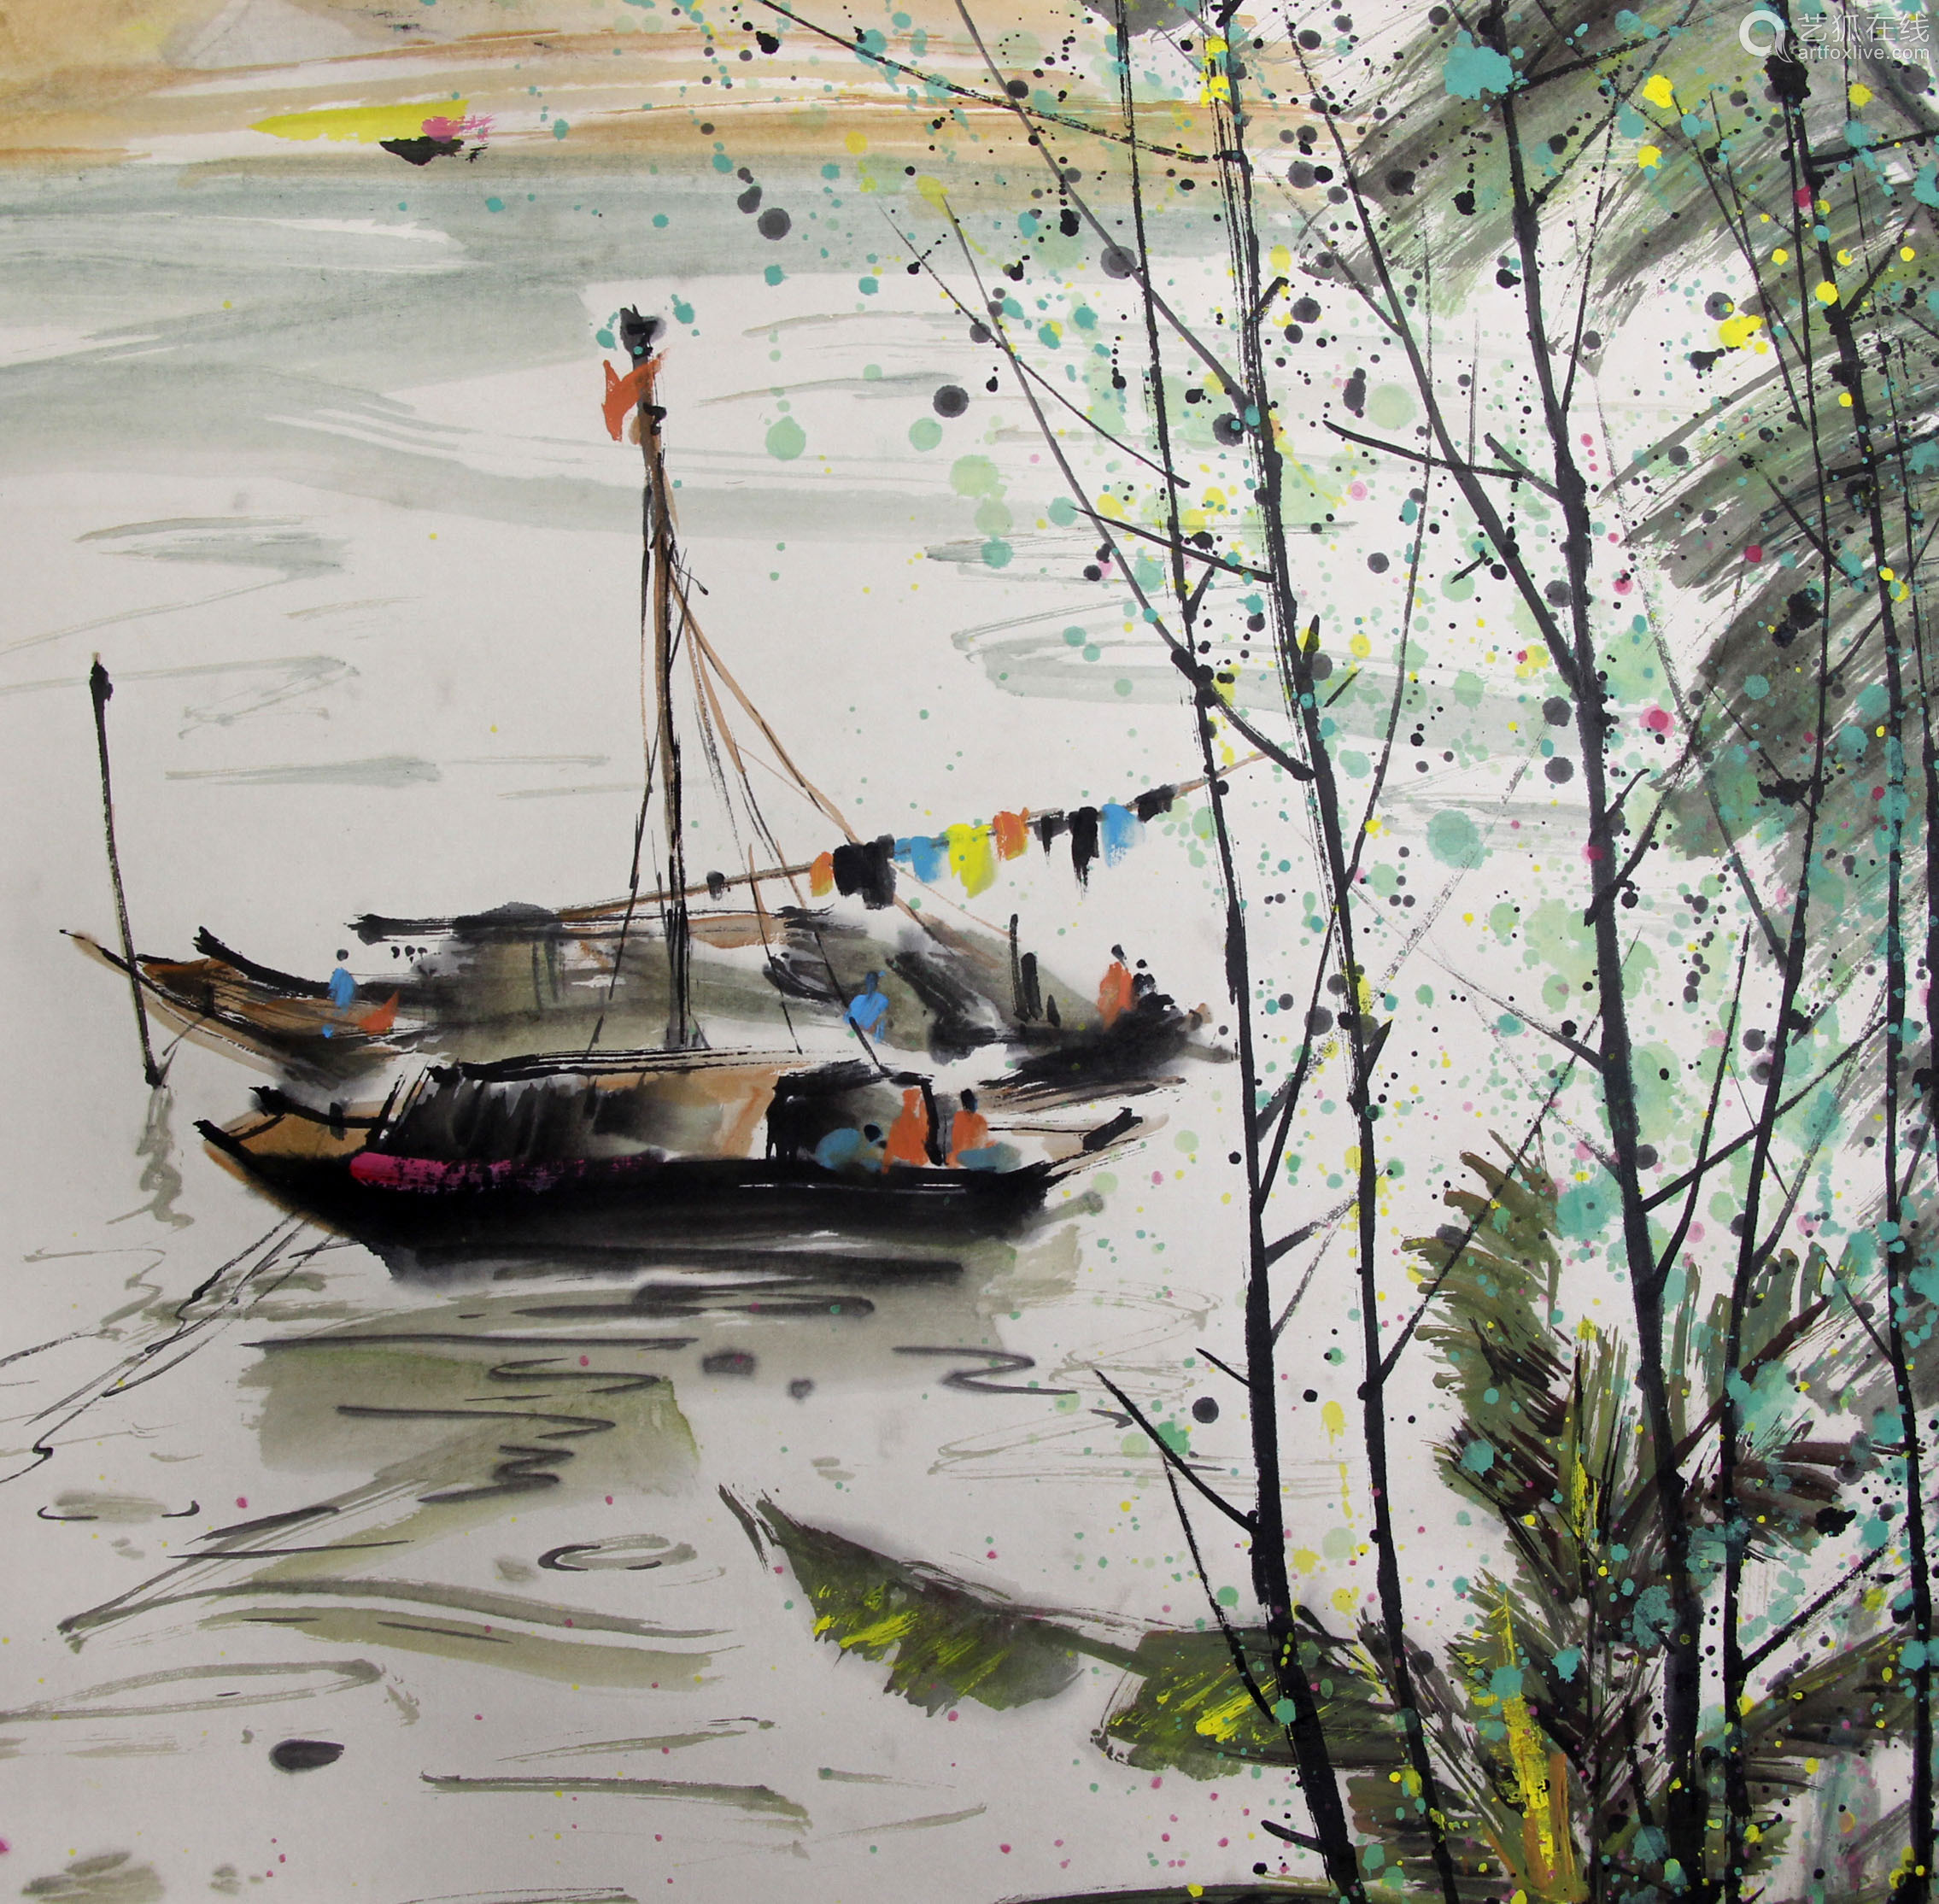 Chinese ink painting,
Wu Guanzhong's Ink and Wash Landscape ...